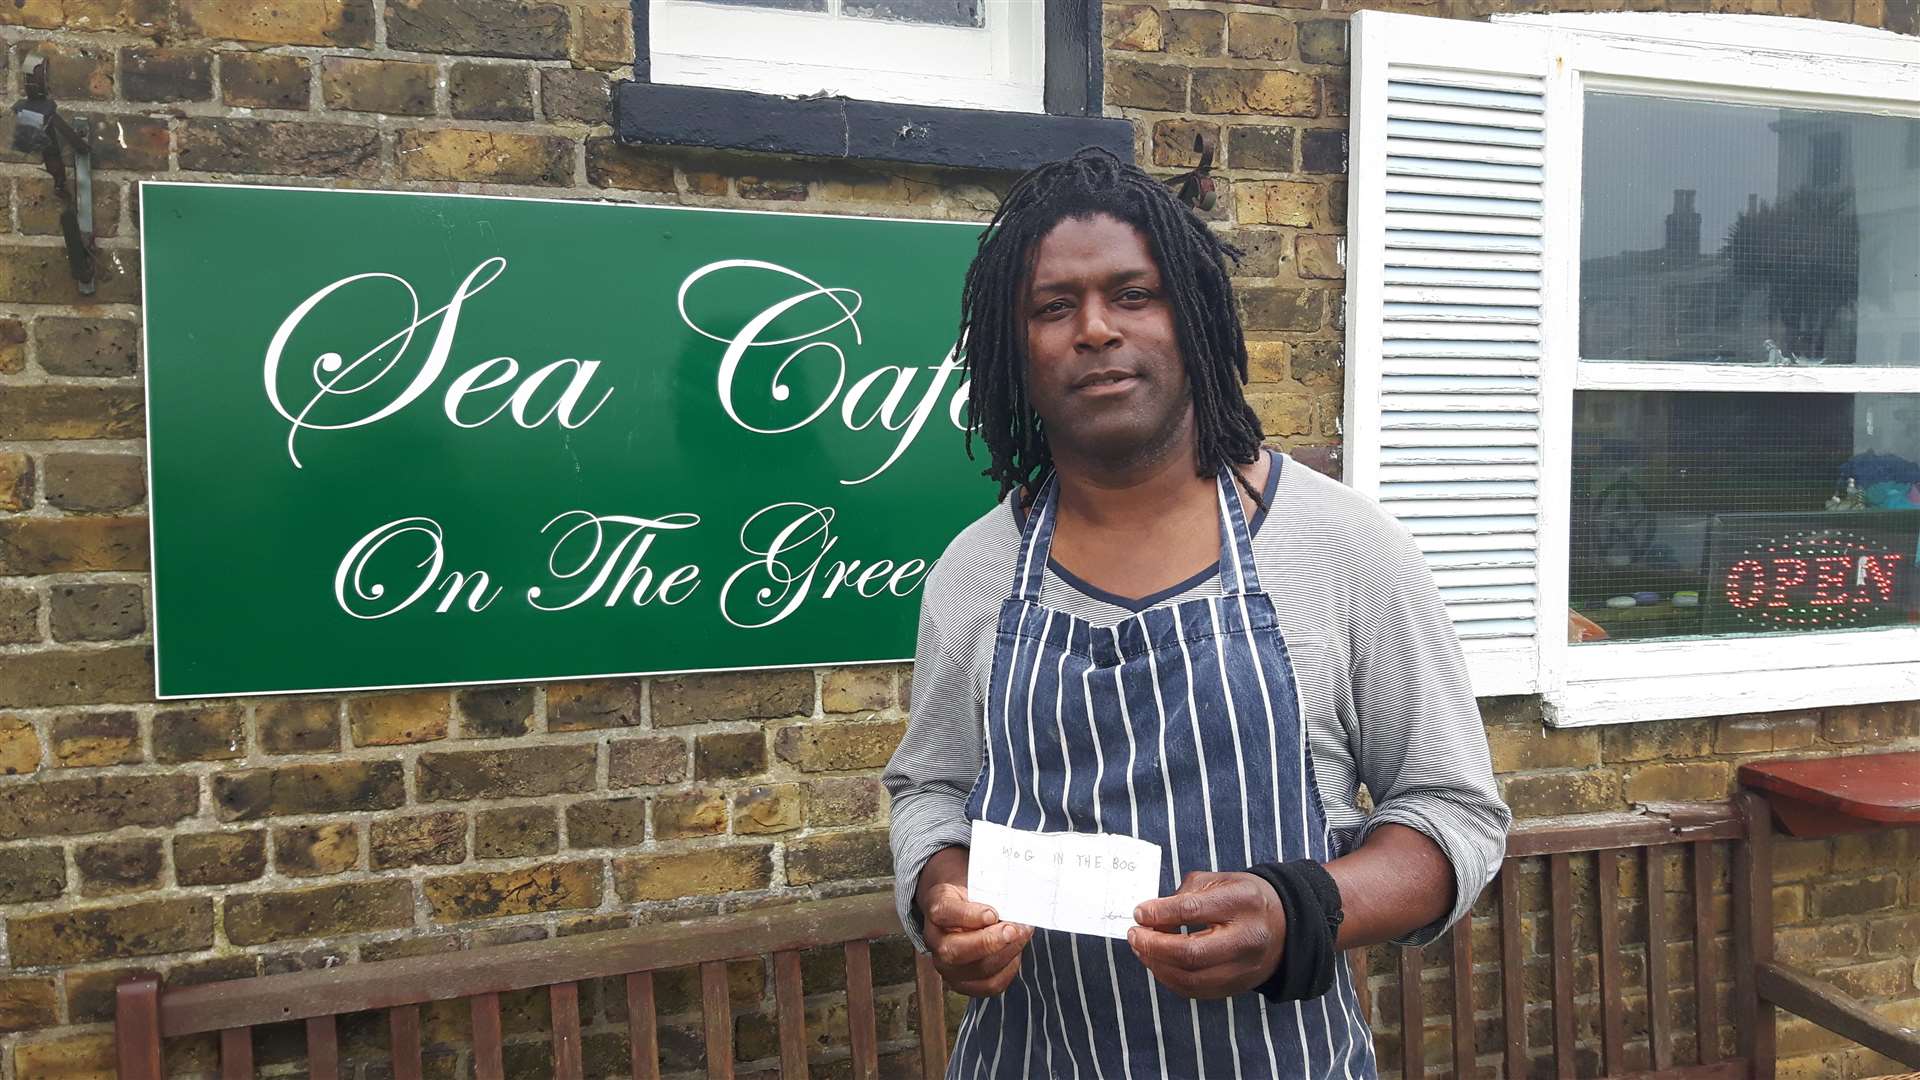 Cafe owner Peter St. Ange is launching a campaign against racism (2295165)